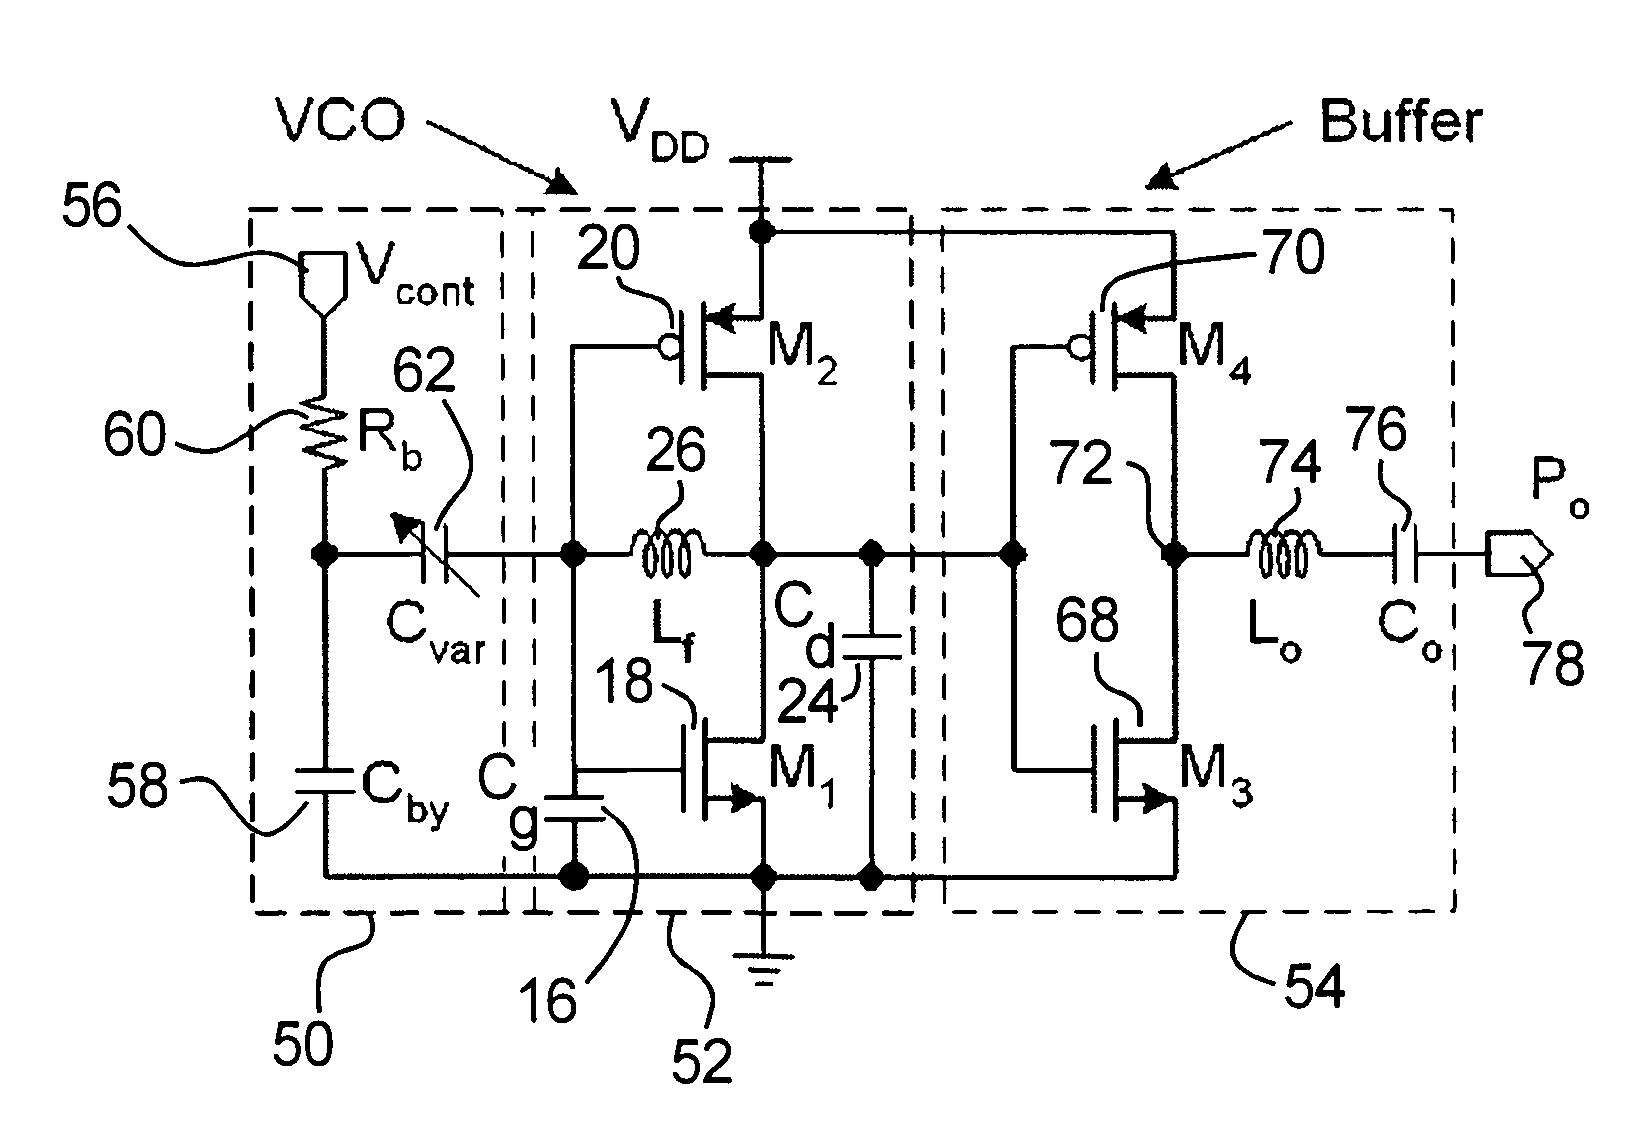 Complementary voltage controlled oscillator